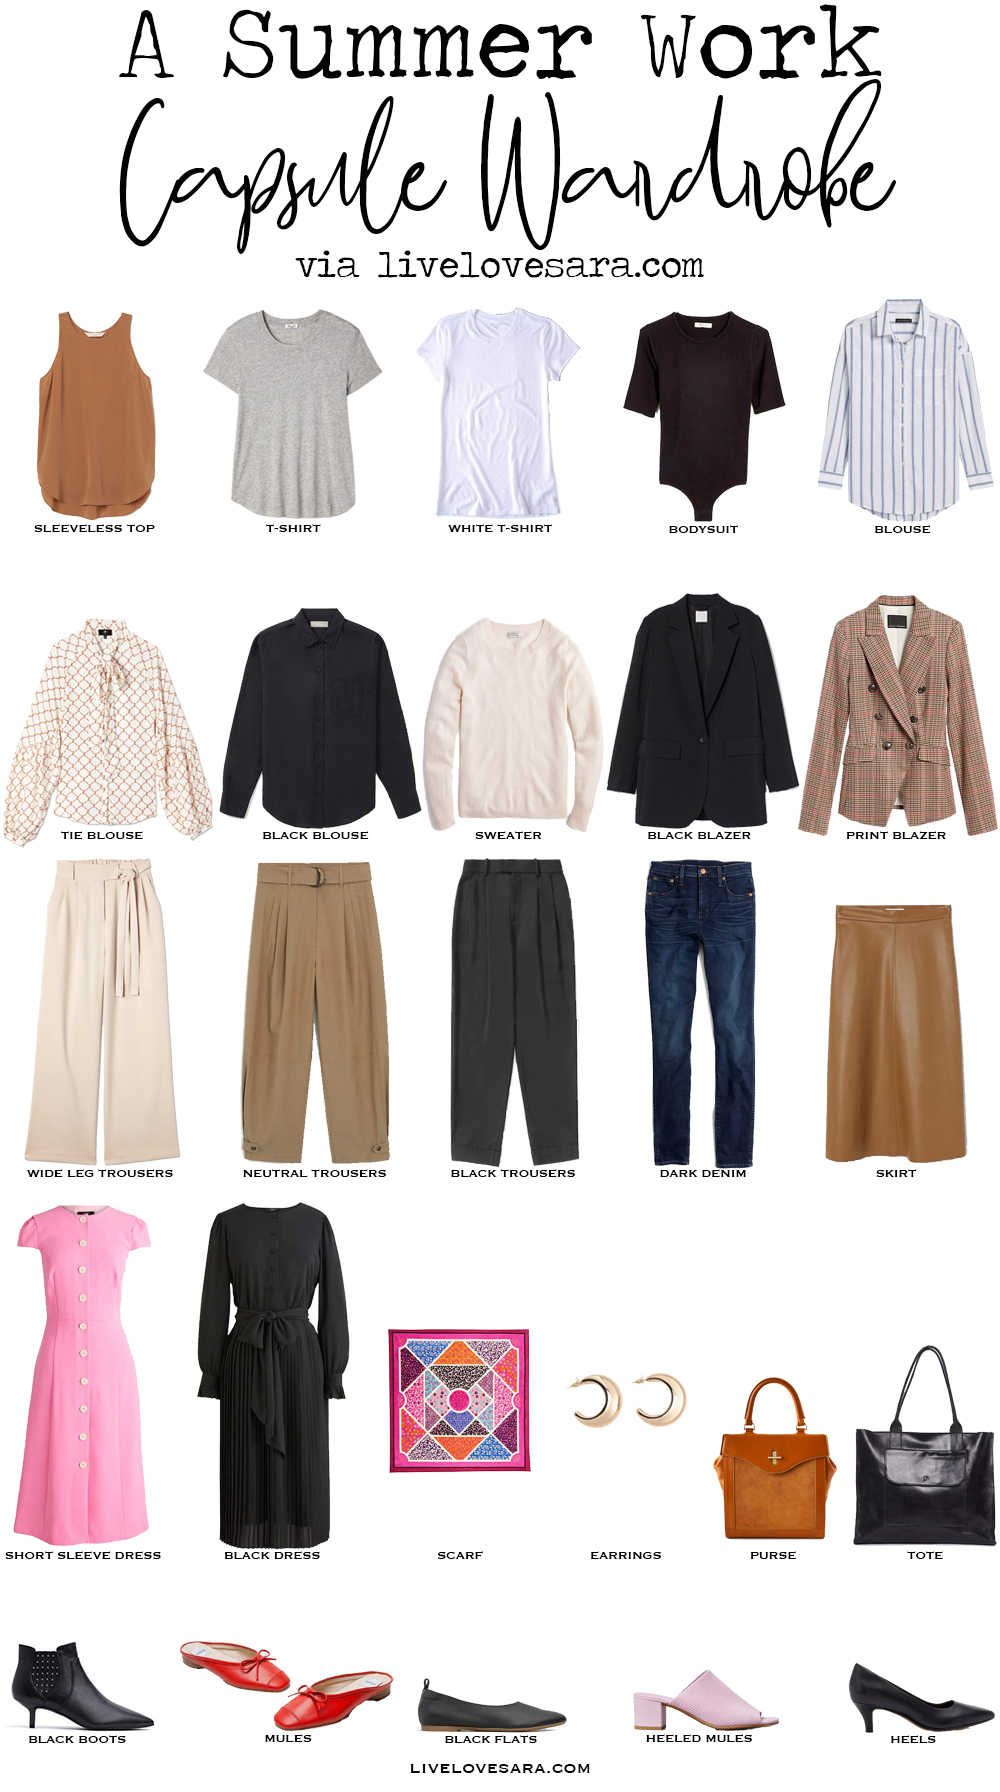 How to Build a Summer Capsule Wardrobe on a Budget - livelovesara